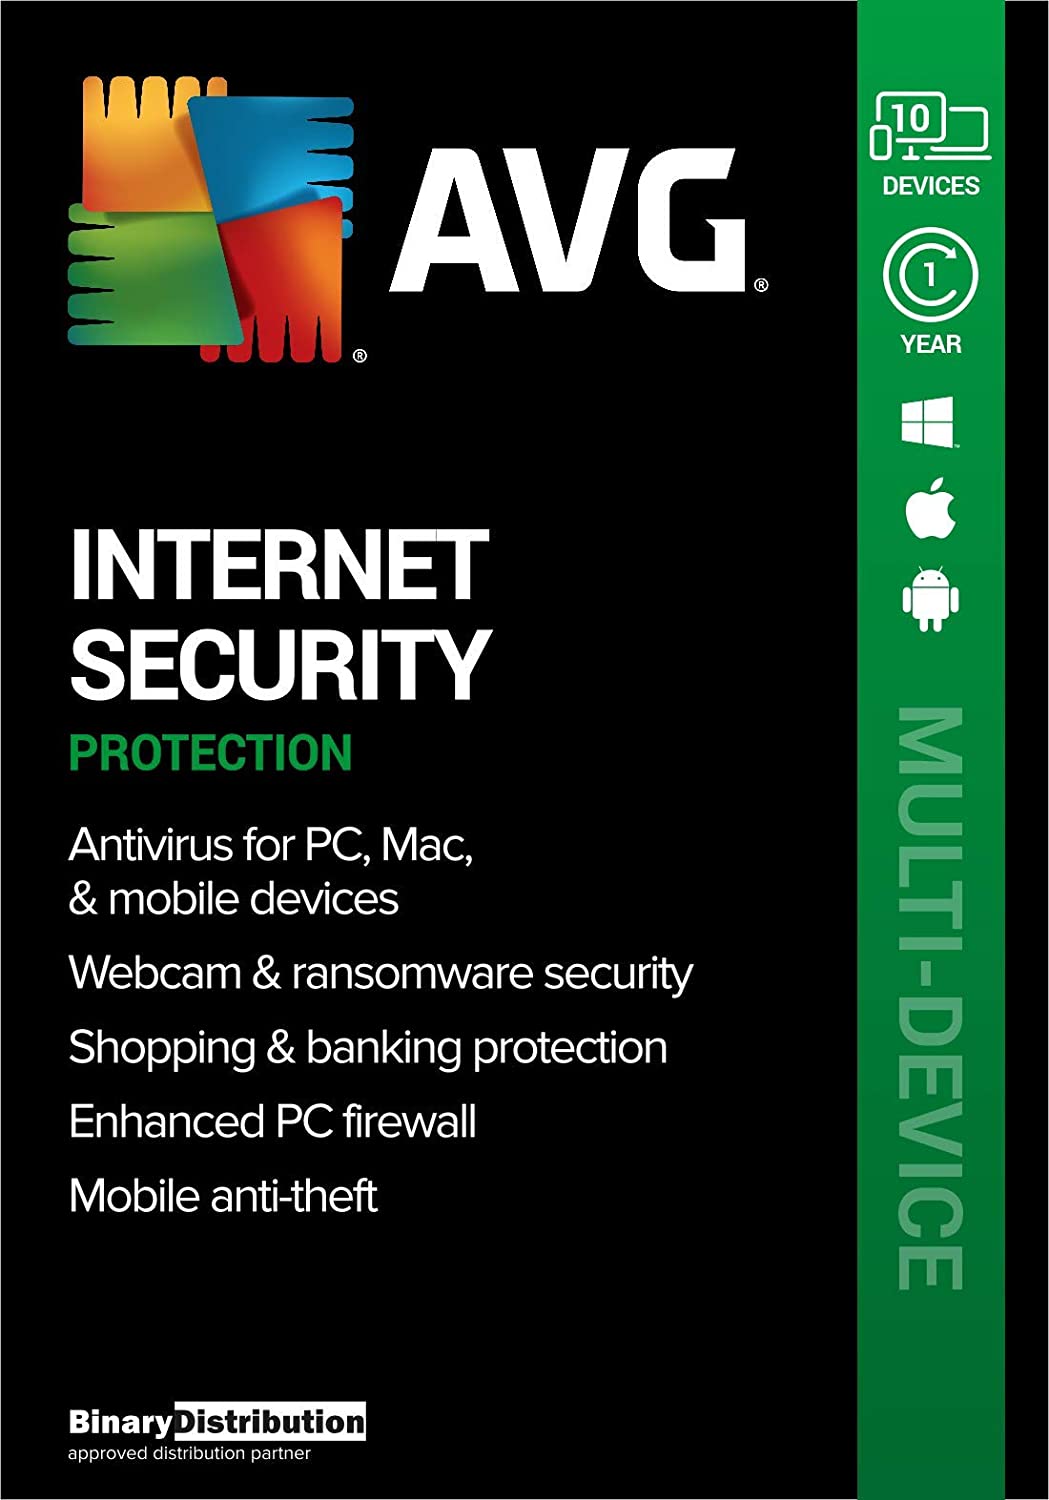 AVG Internet Security 2022 - 1 Device - 1 Year [Download] Mac | Windows 10 | Android